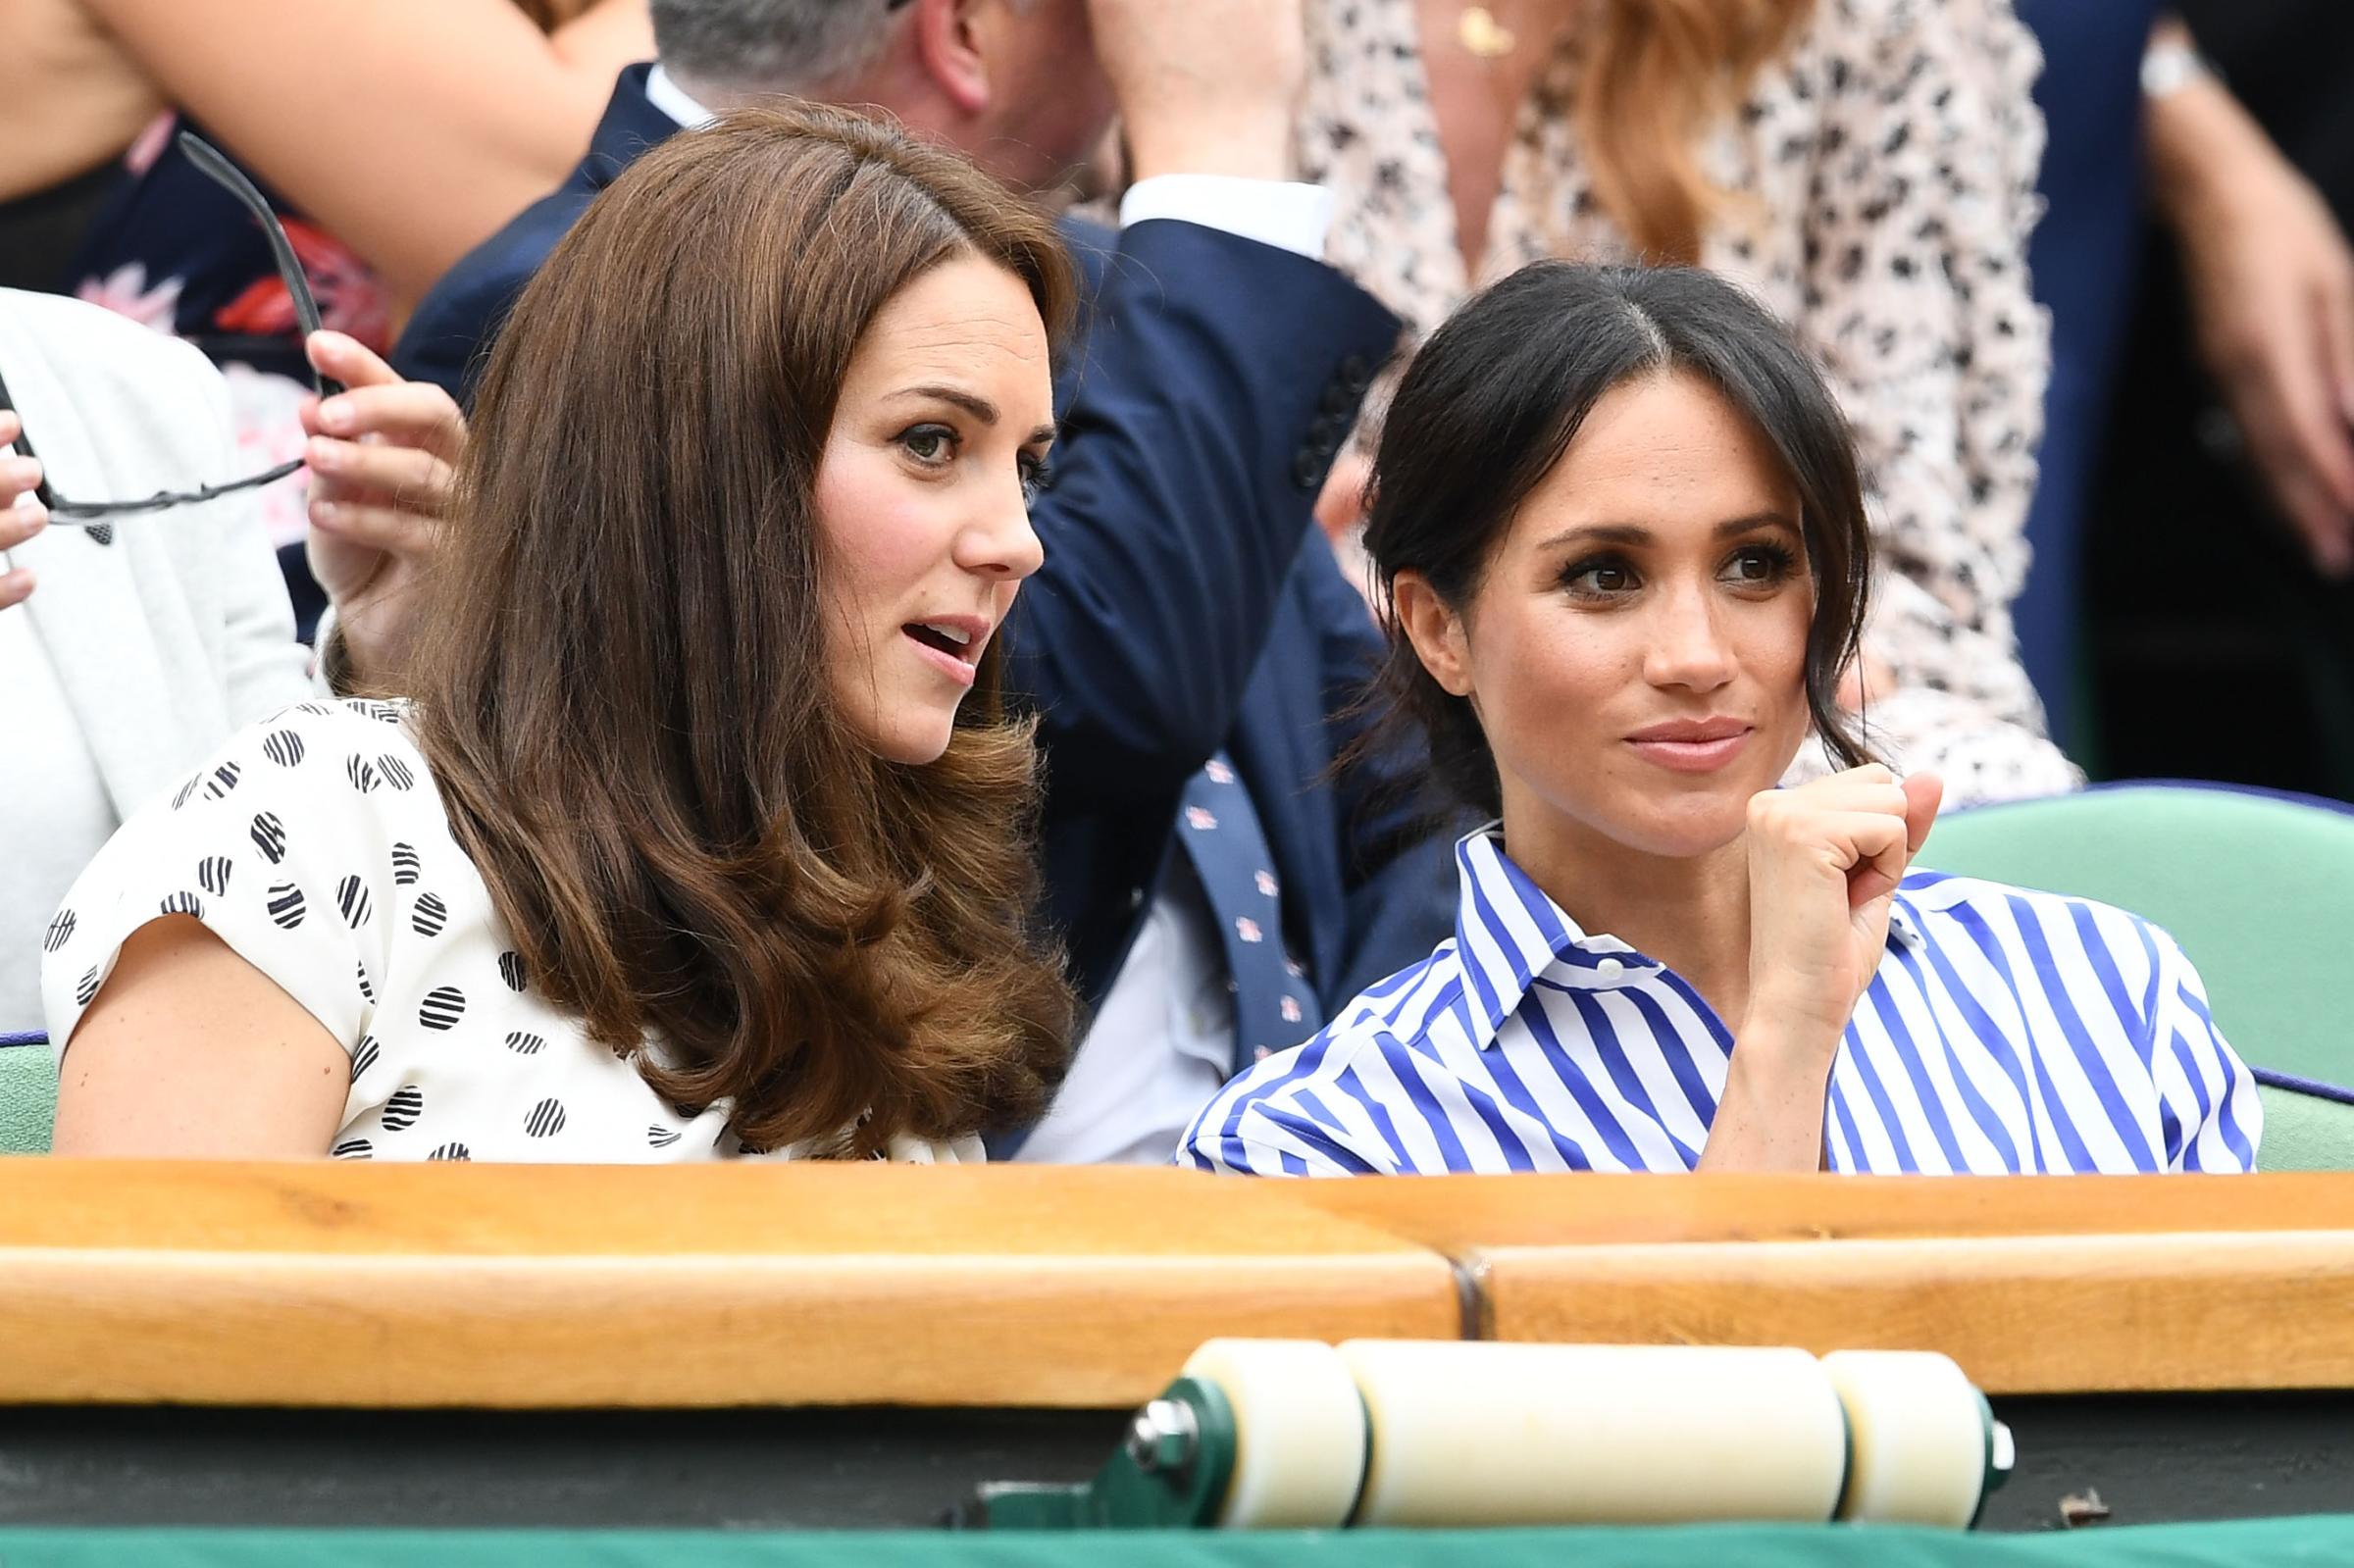 Kate Middleton and Meghan Markle watch the match intensely